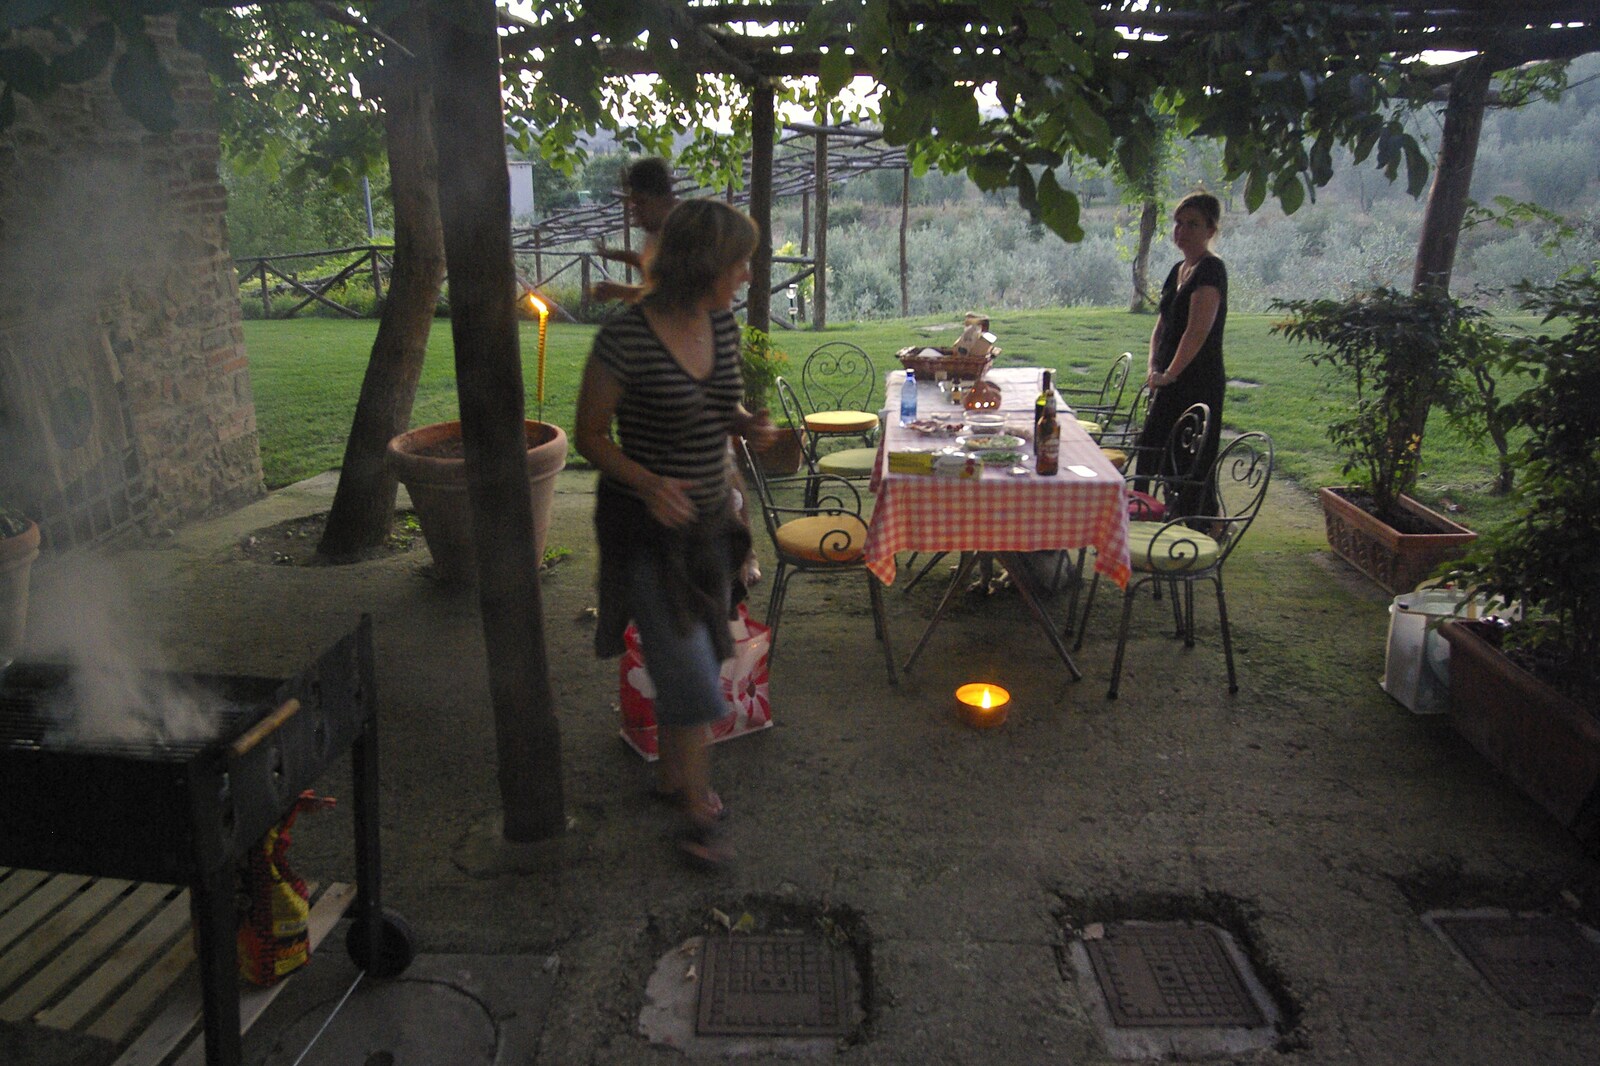 Tenuta Il Palazzo in Arezzo, Tuscany, Italy - 22nd July 2008: An evening barbeque